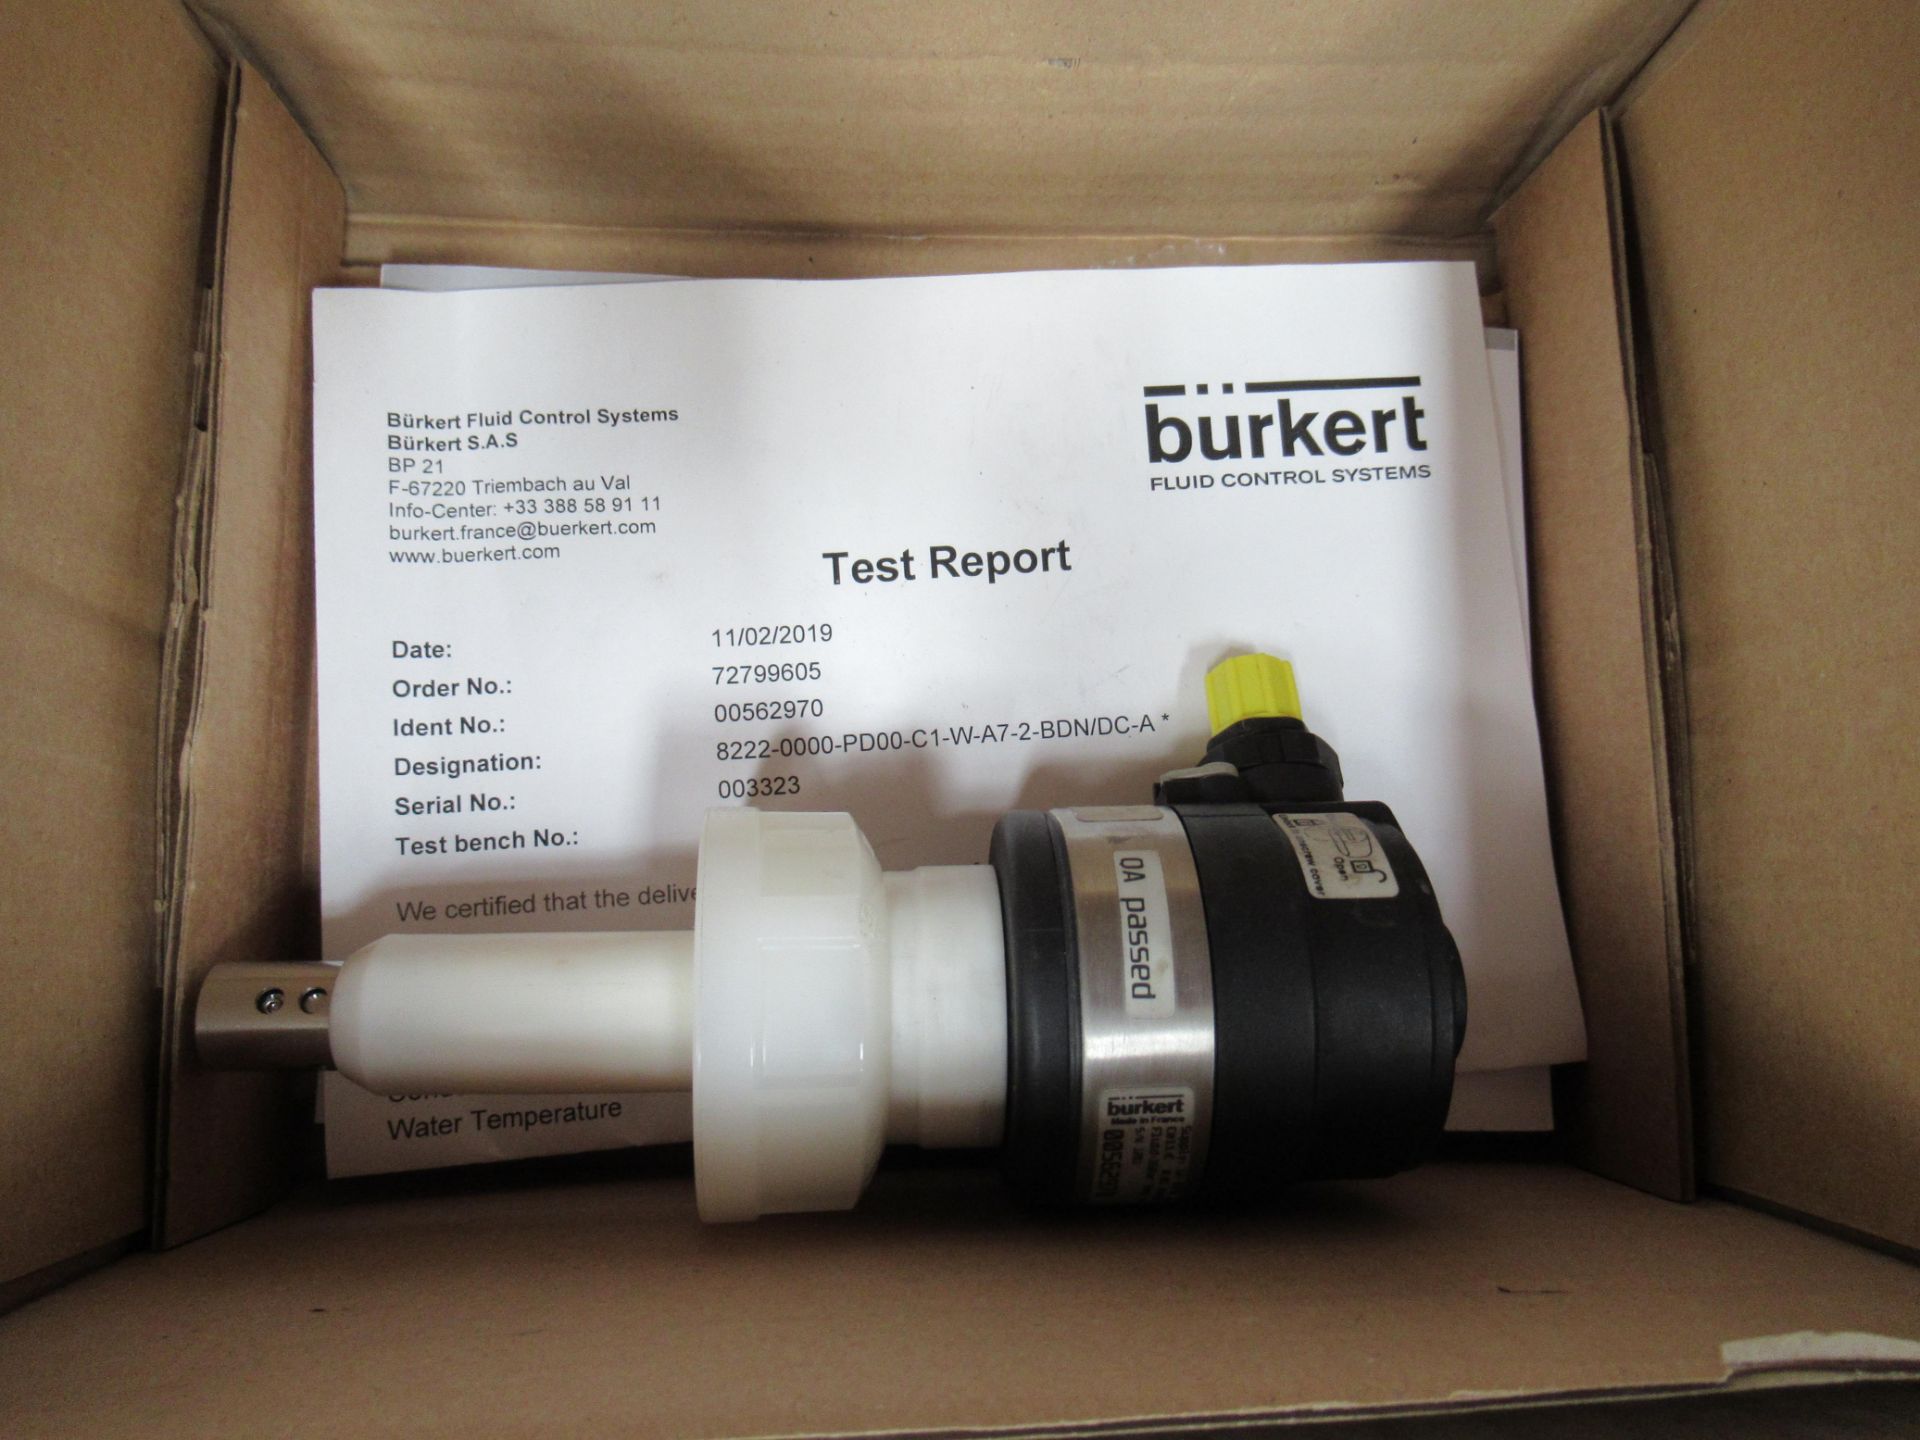 A KVM extender, 2x microamperes, and a Burkert fluid control system - Image 4 of 4